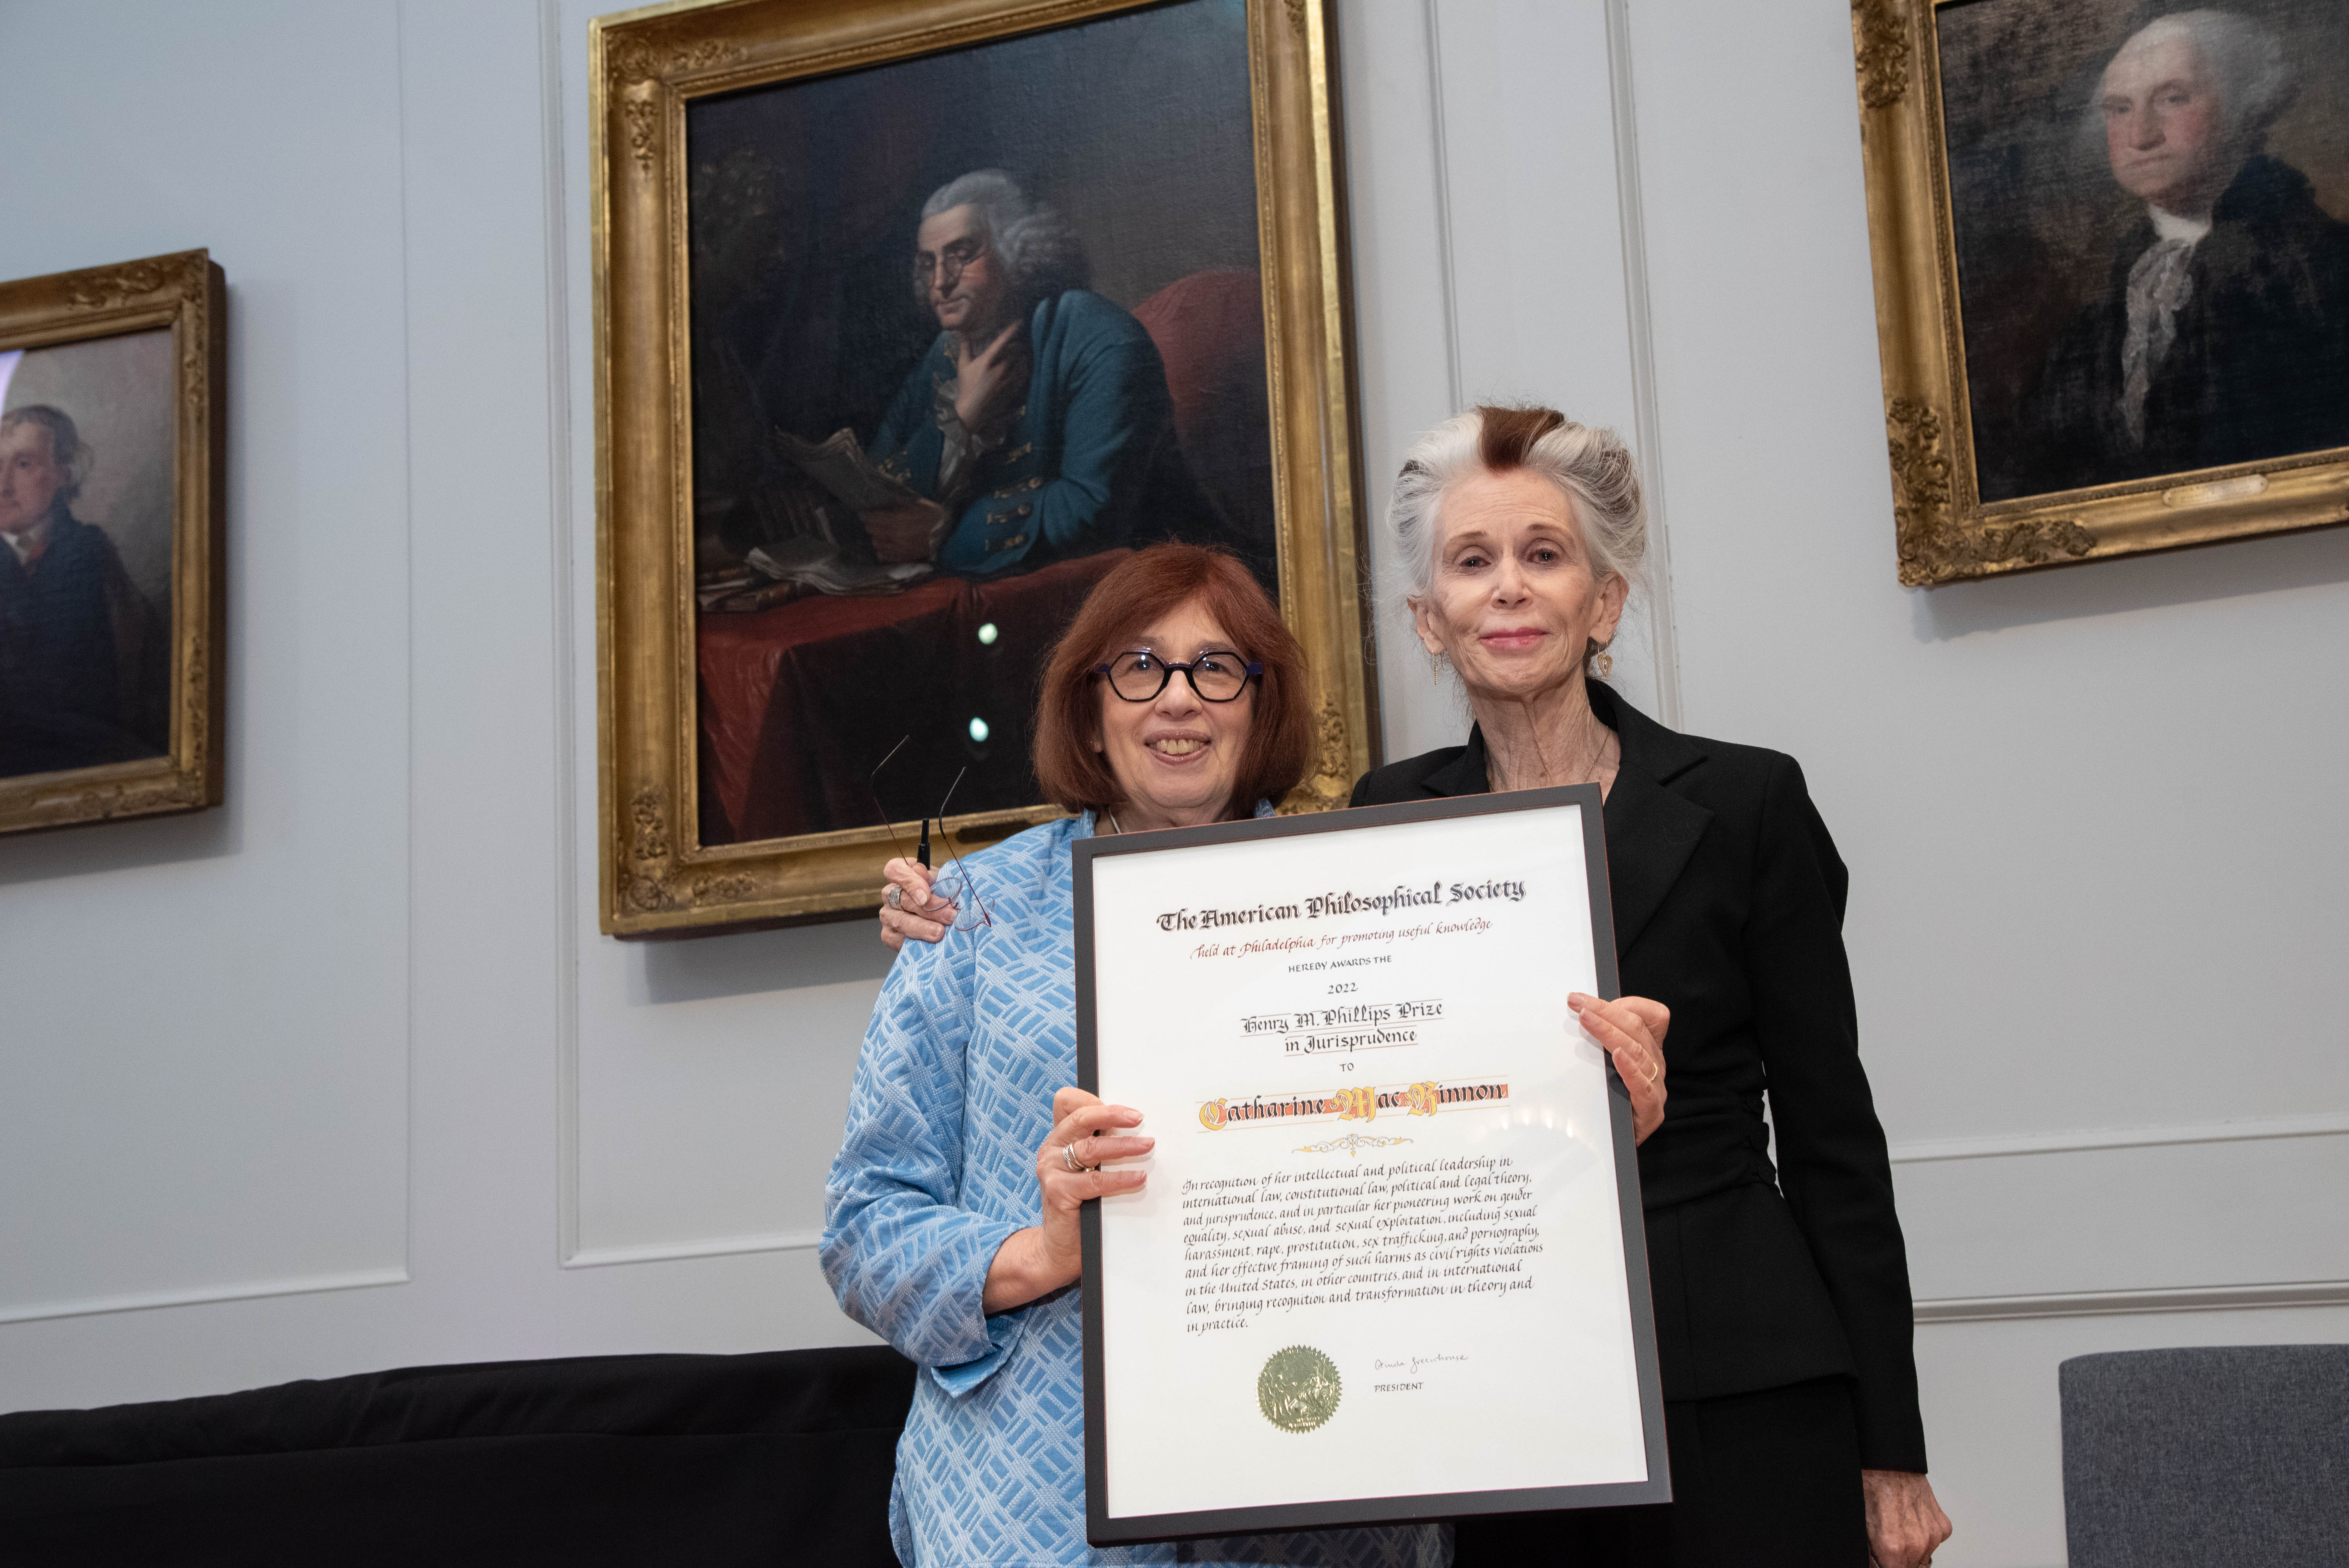 Catharine MacKinnon receiving the Phillips Prize Certificate